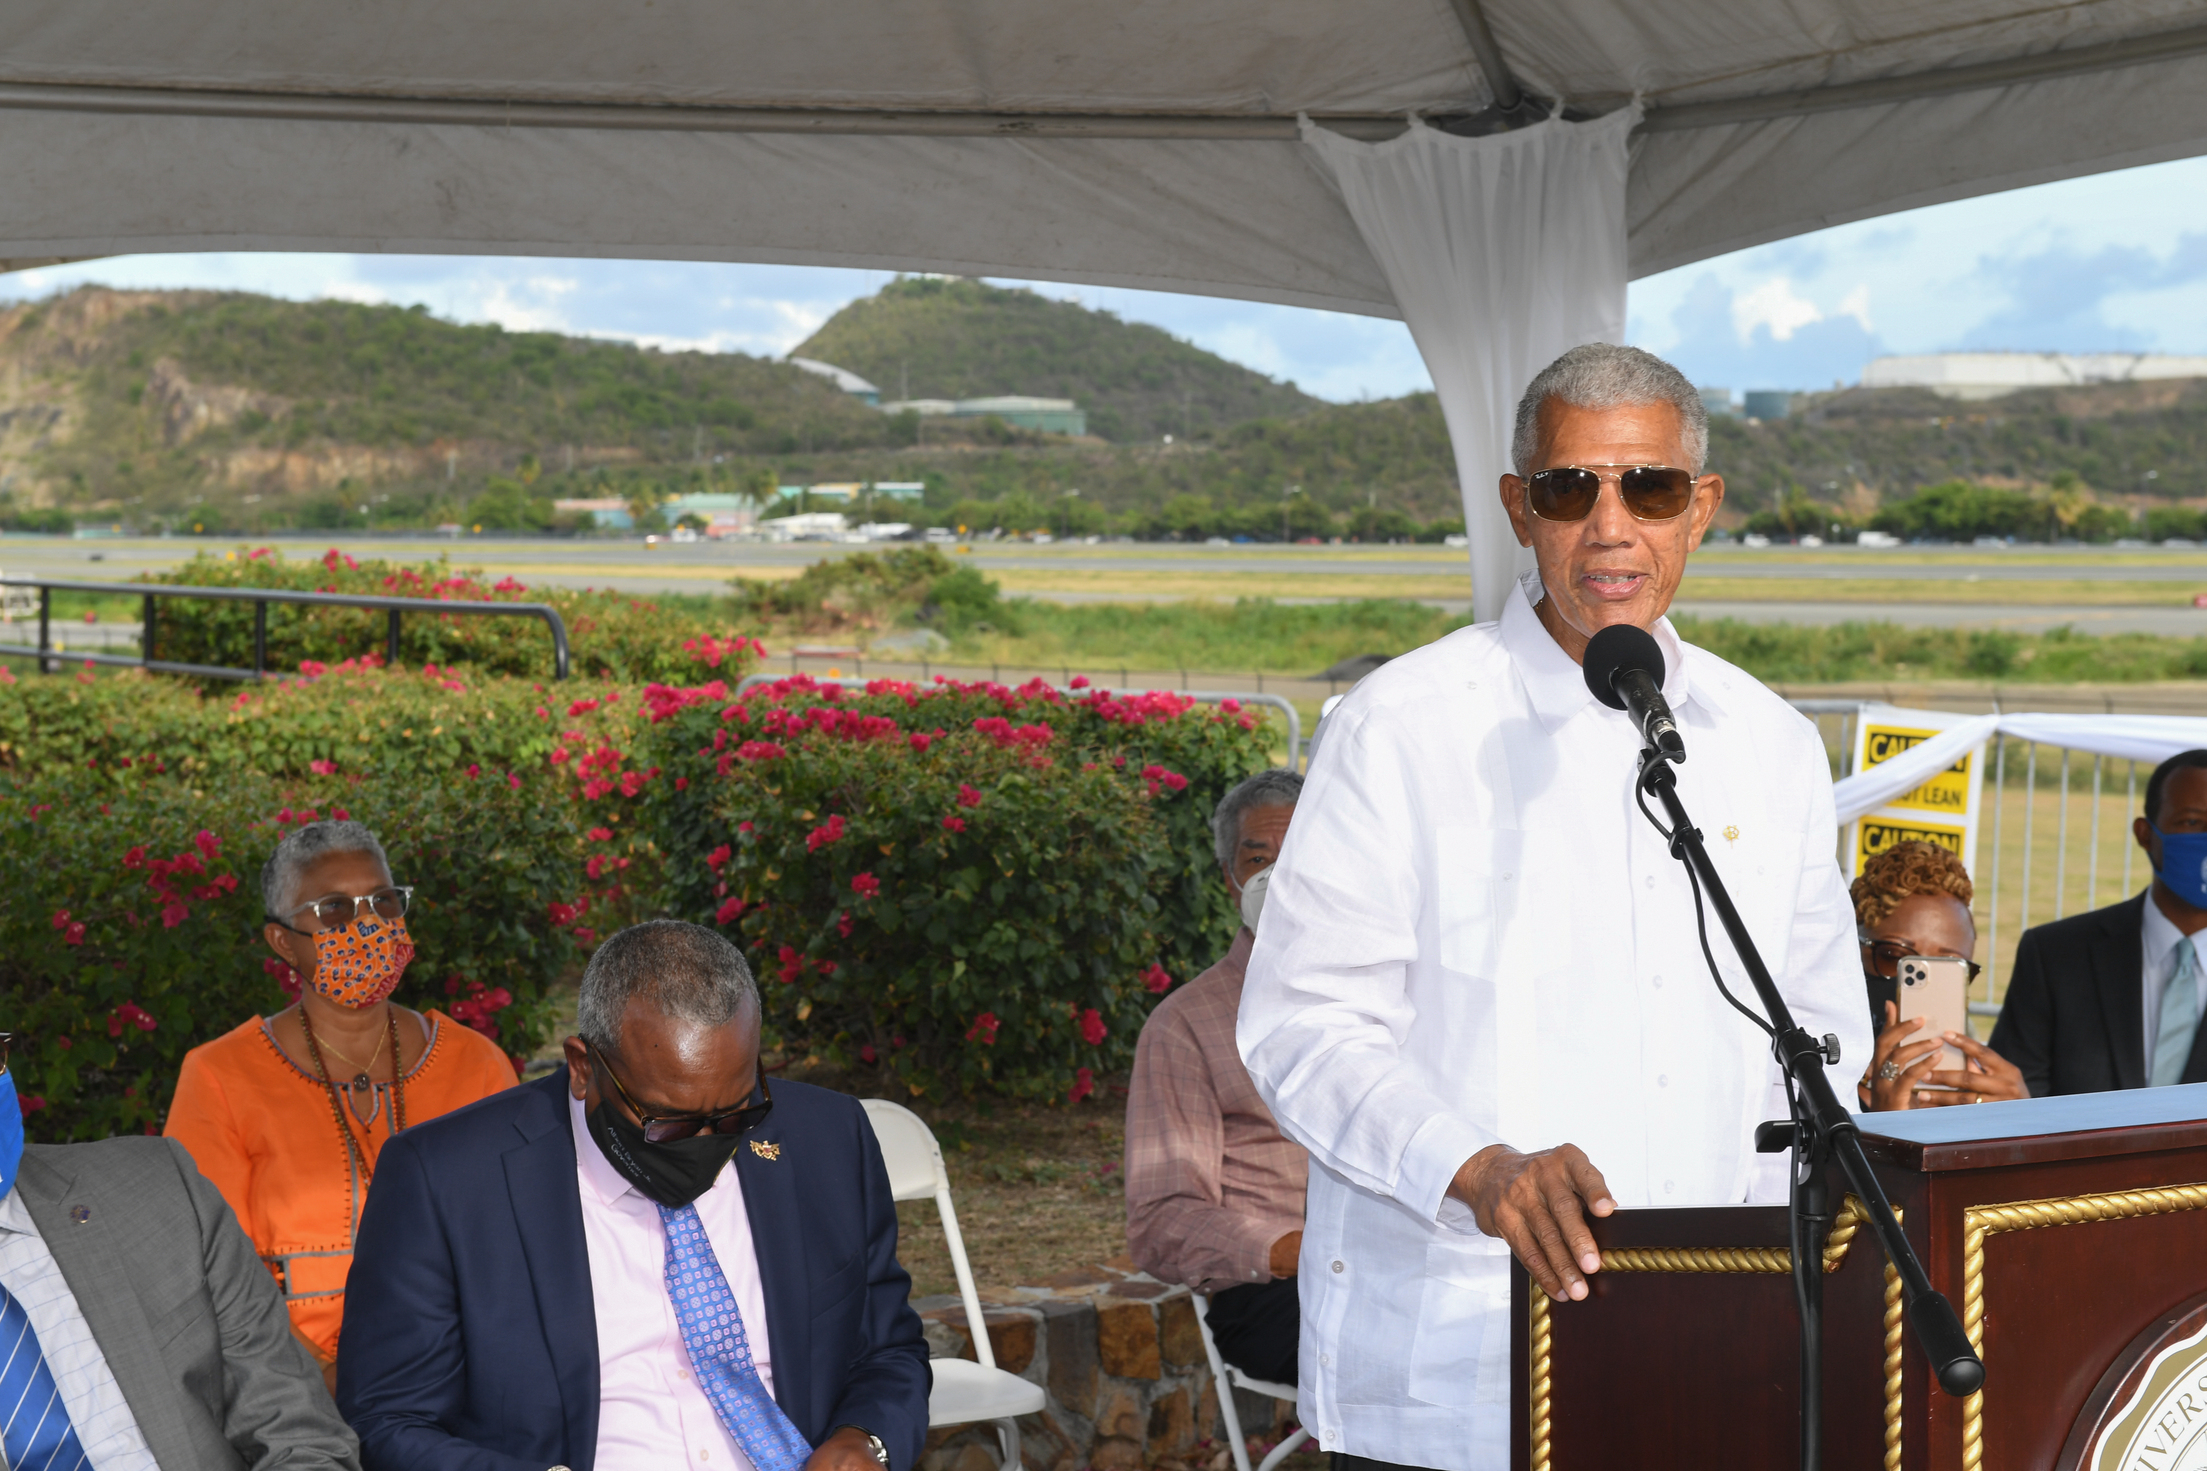 UVI St. Thomas Campus Renamed As The Orville E. Kean Campus With New Sign